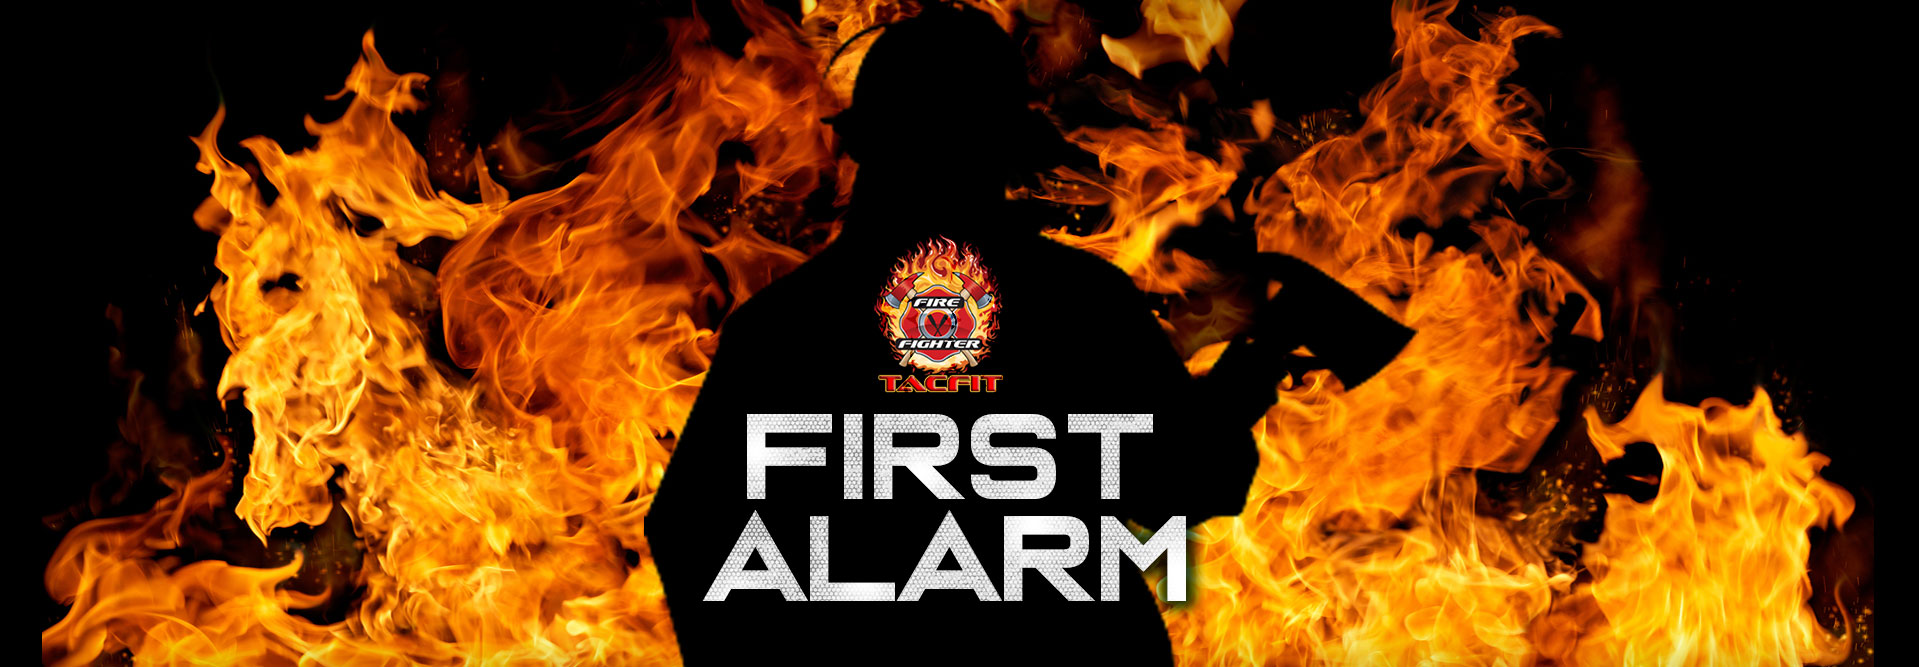 Cristian and Ryan - Tacfit Firefighter First Alarm